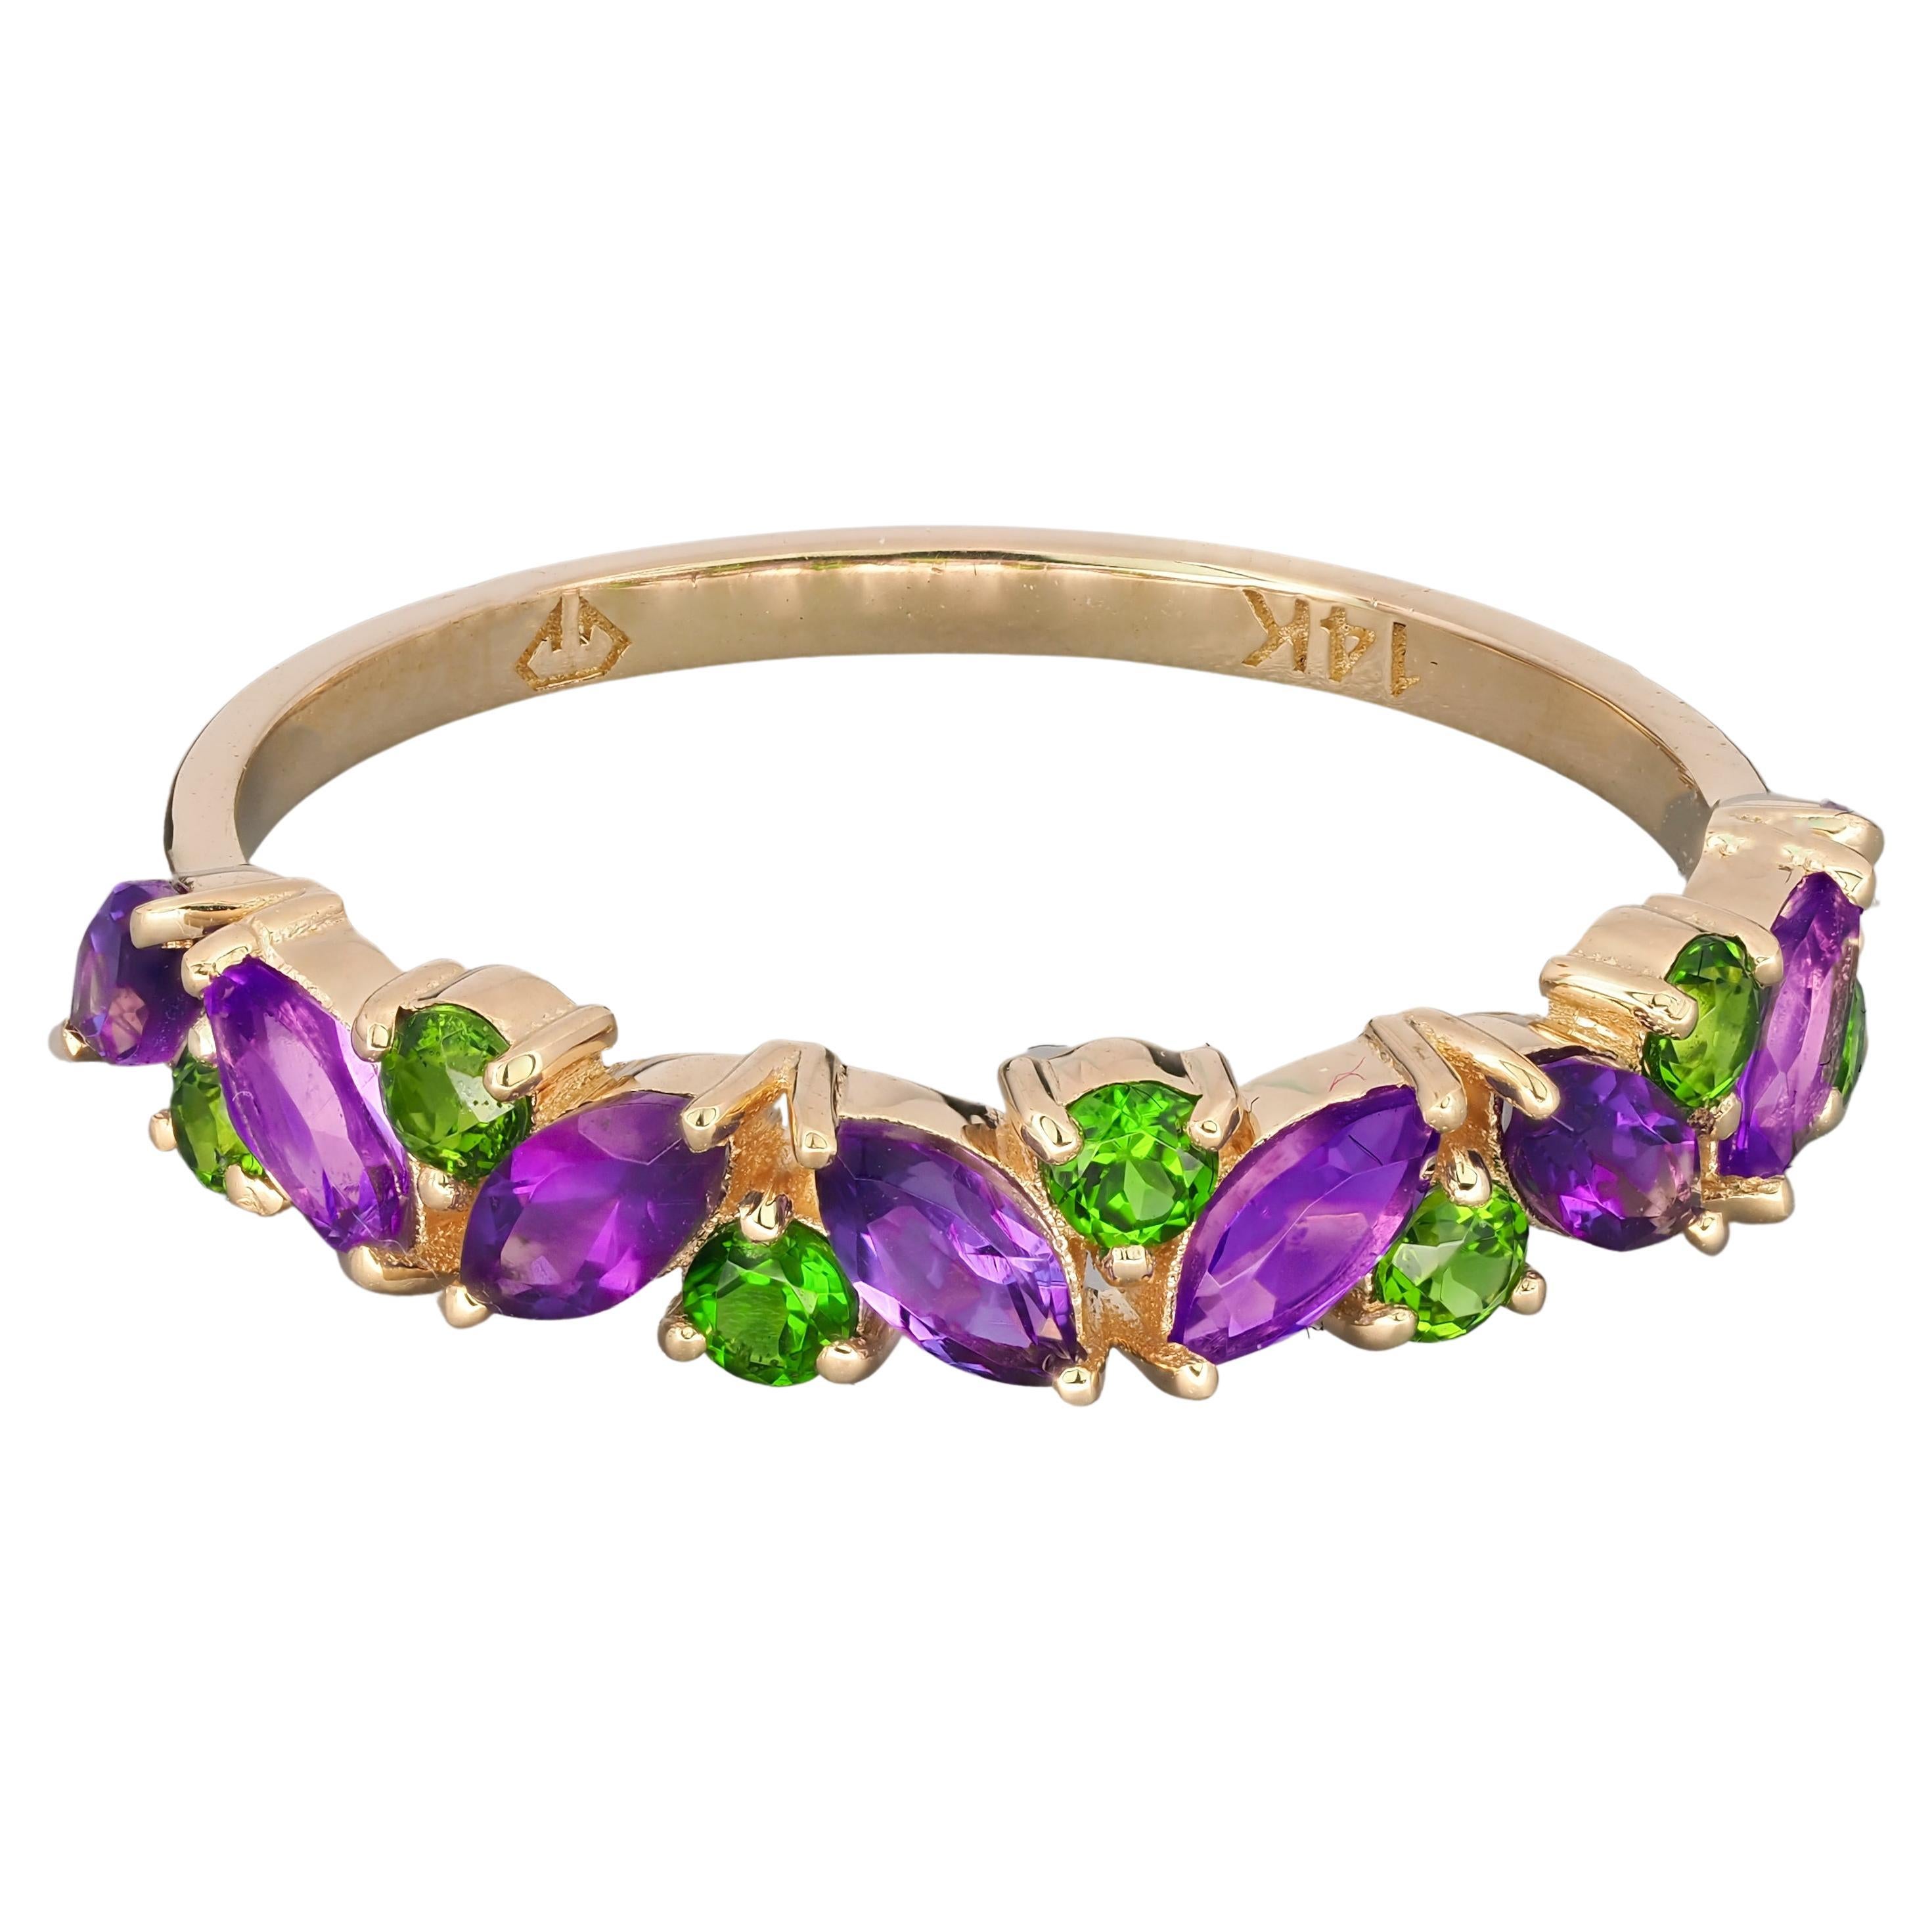 For Sale:  14k Gold Half Eternity Ring with Natural Amethyst and Chrome Diopside